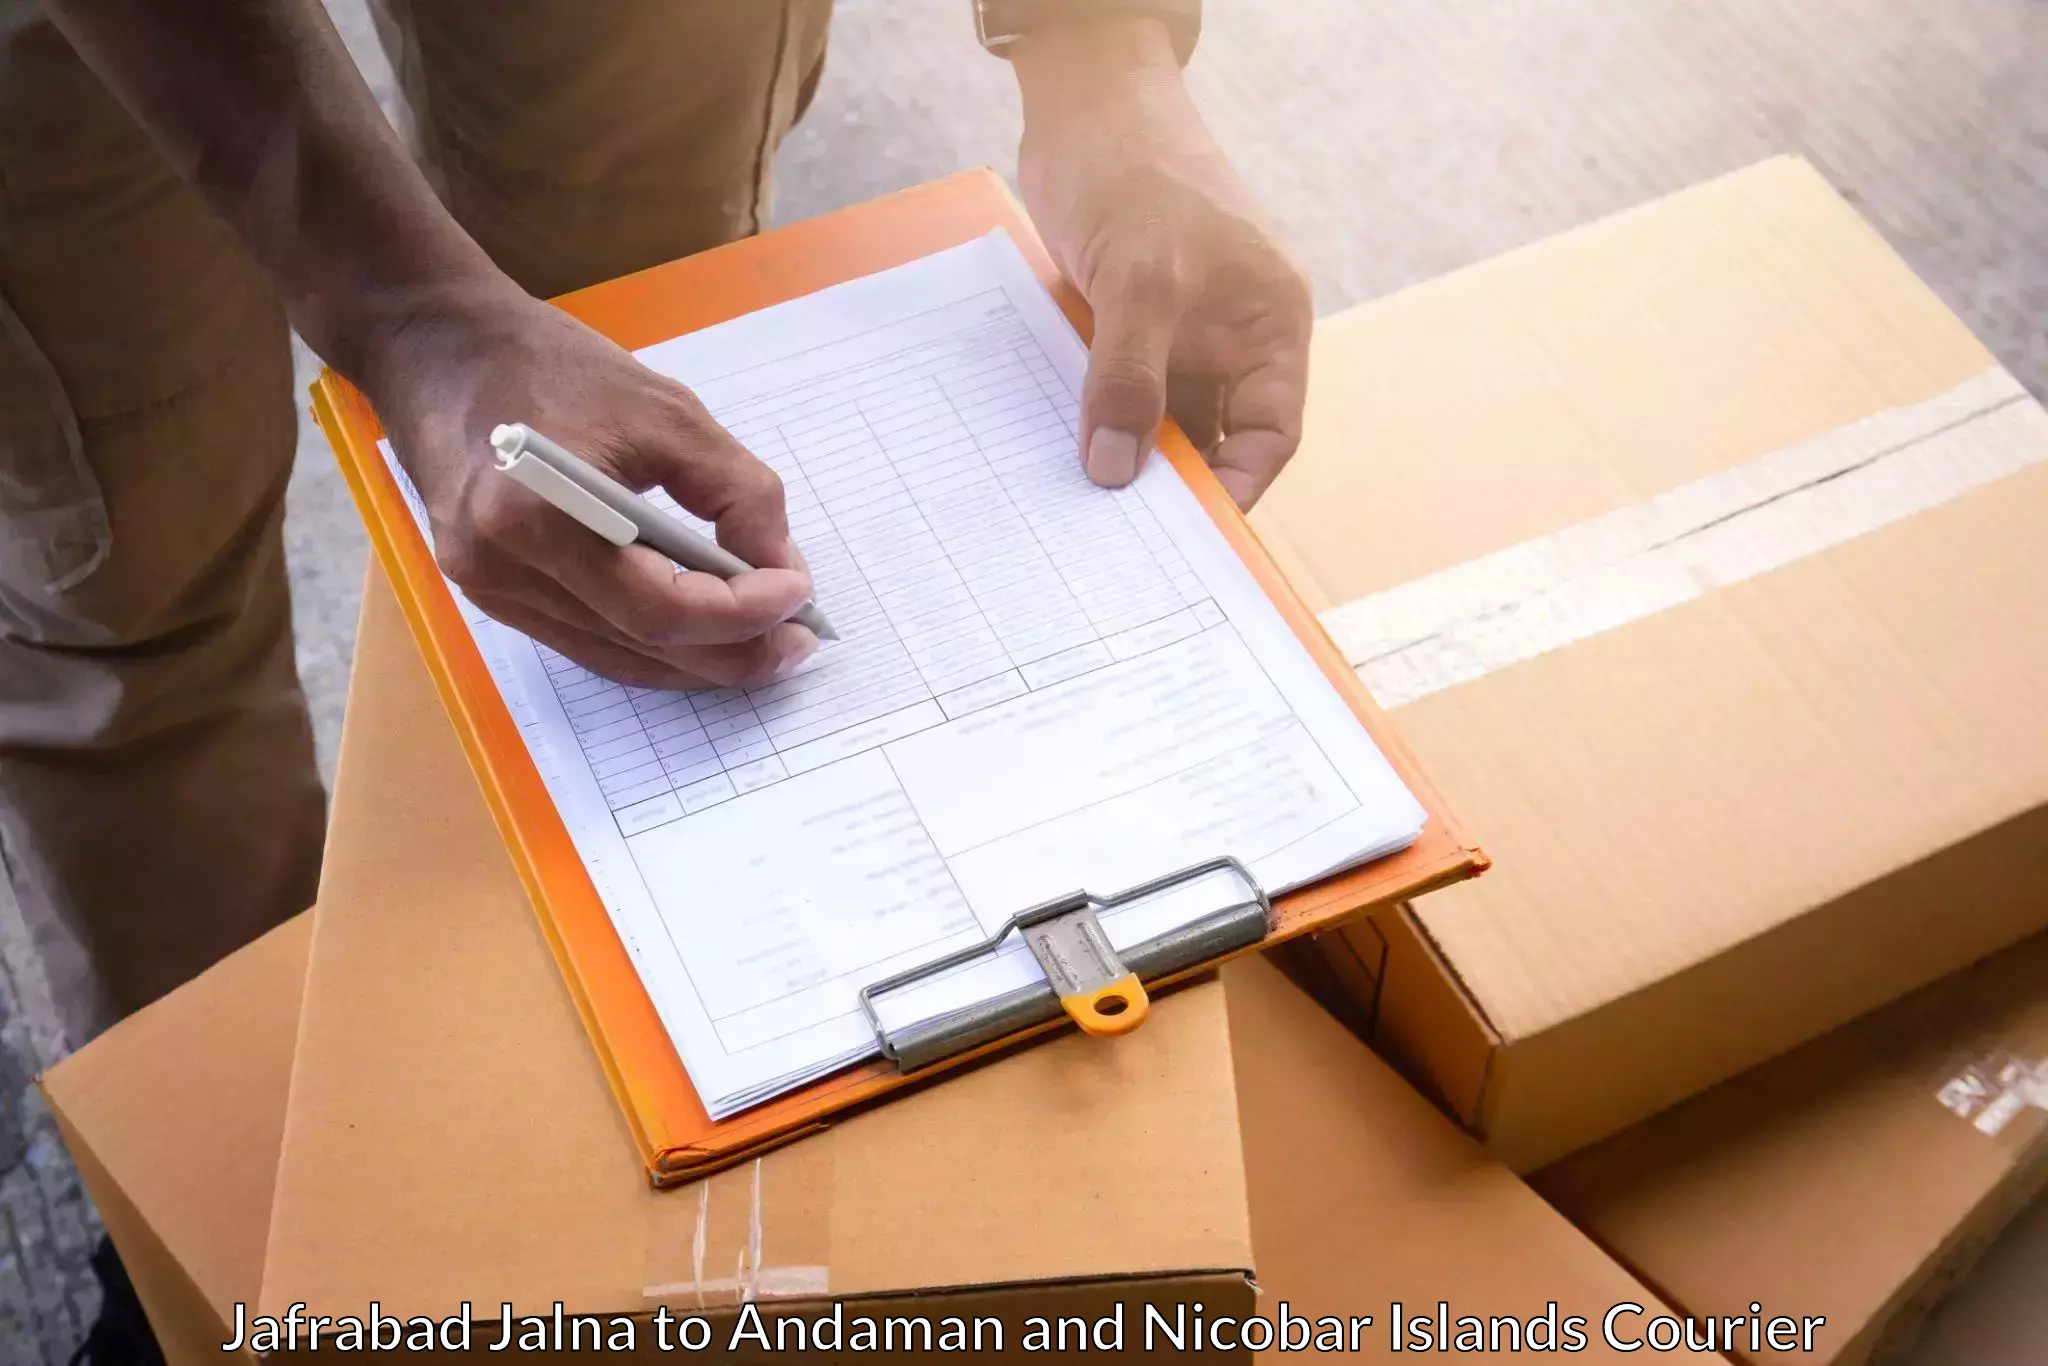 Fast shipping solutions Jafrabad Jalna to Andaman and Nicobar Islands